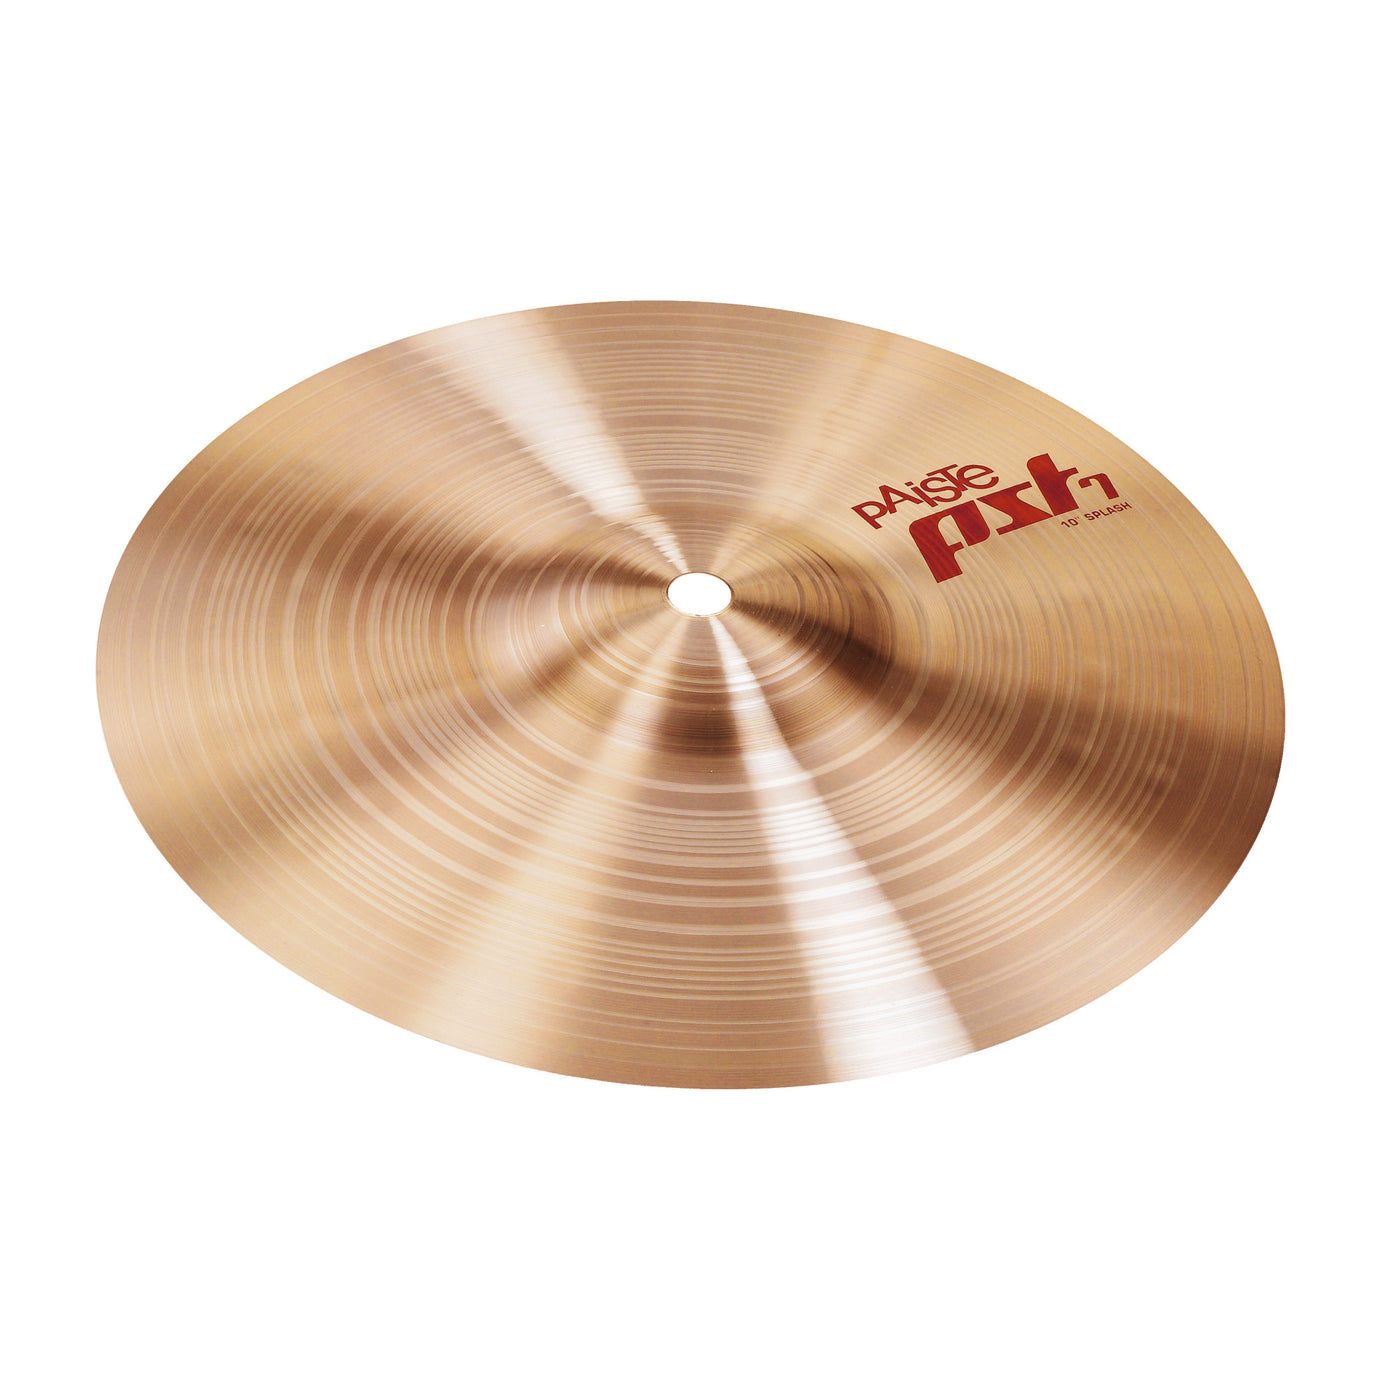 Paiste Splash Cymbal, PST 7 Series, Percussion Instrument for Drums, 10"